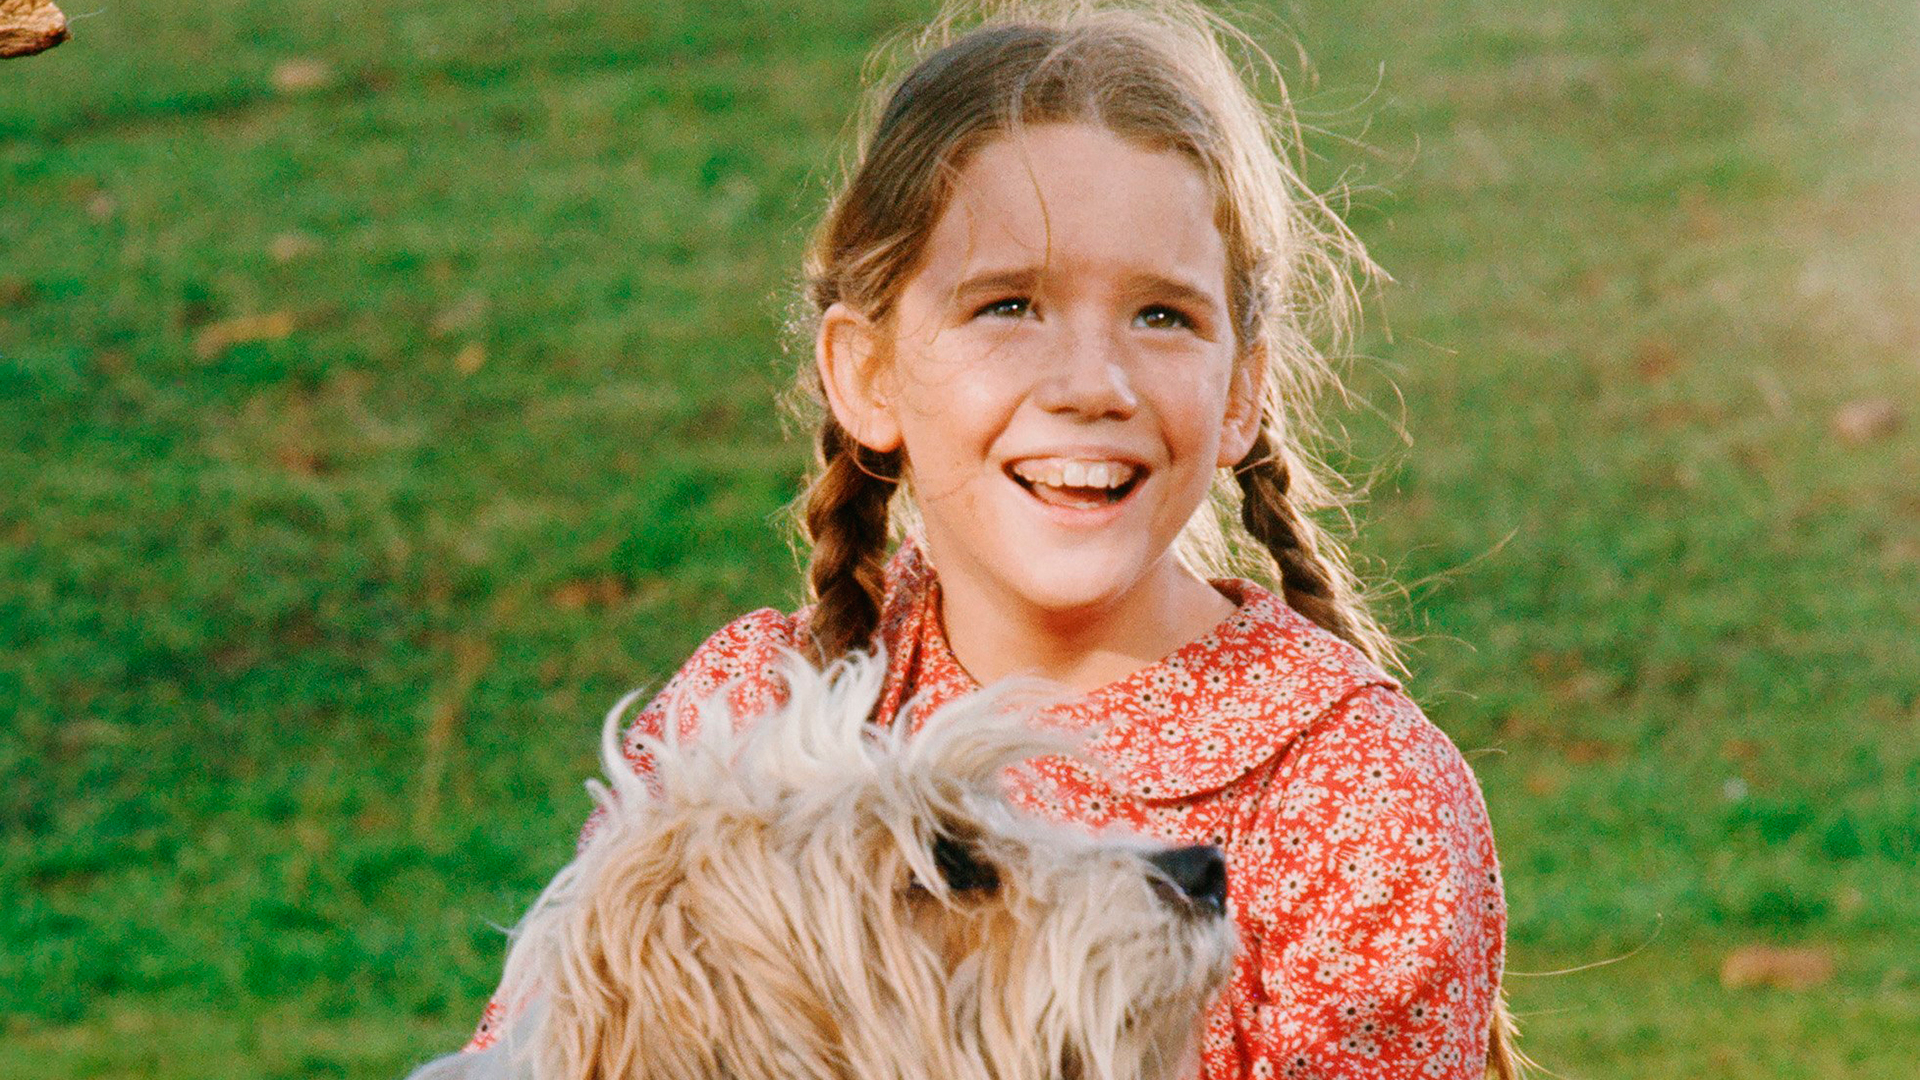 February 7, 1867: Laura Ingalls Wilder Was Born, Later Penning the Popular “Little House” Series - Lifetime